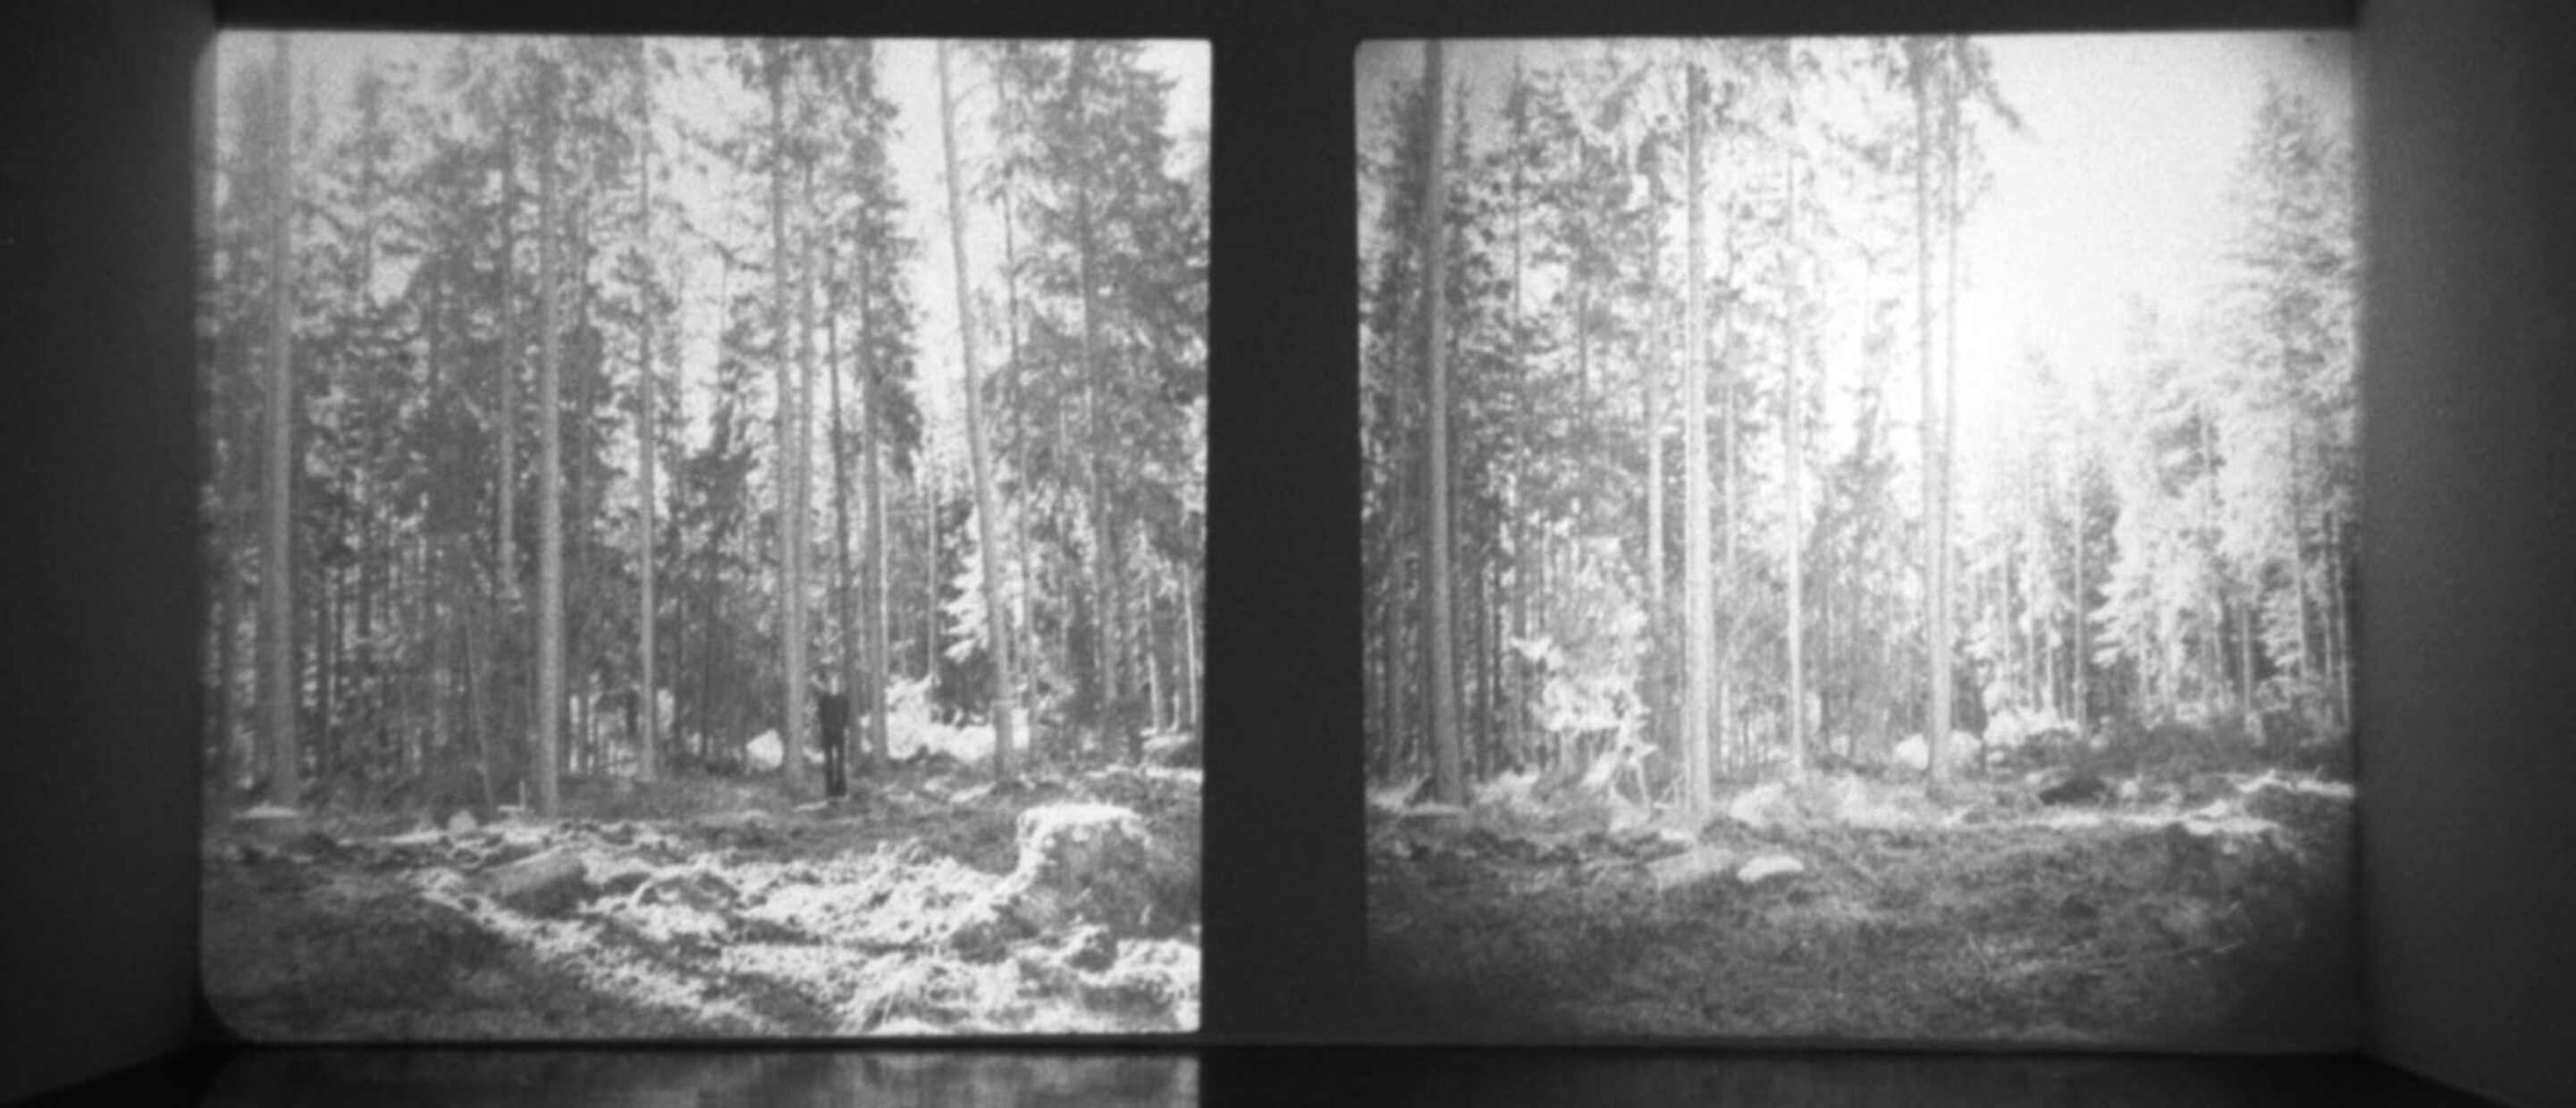 Bas Jan Ader, Untitled (Sweden), 1971. Projection of two color slides. Courtesy of the Bas Jan Ader Estate and Patrick Painter Editions.  